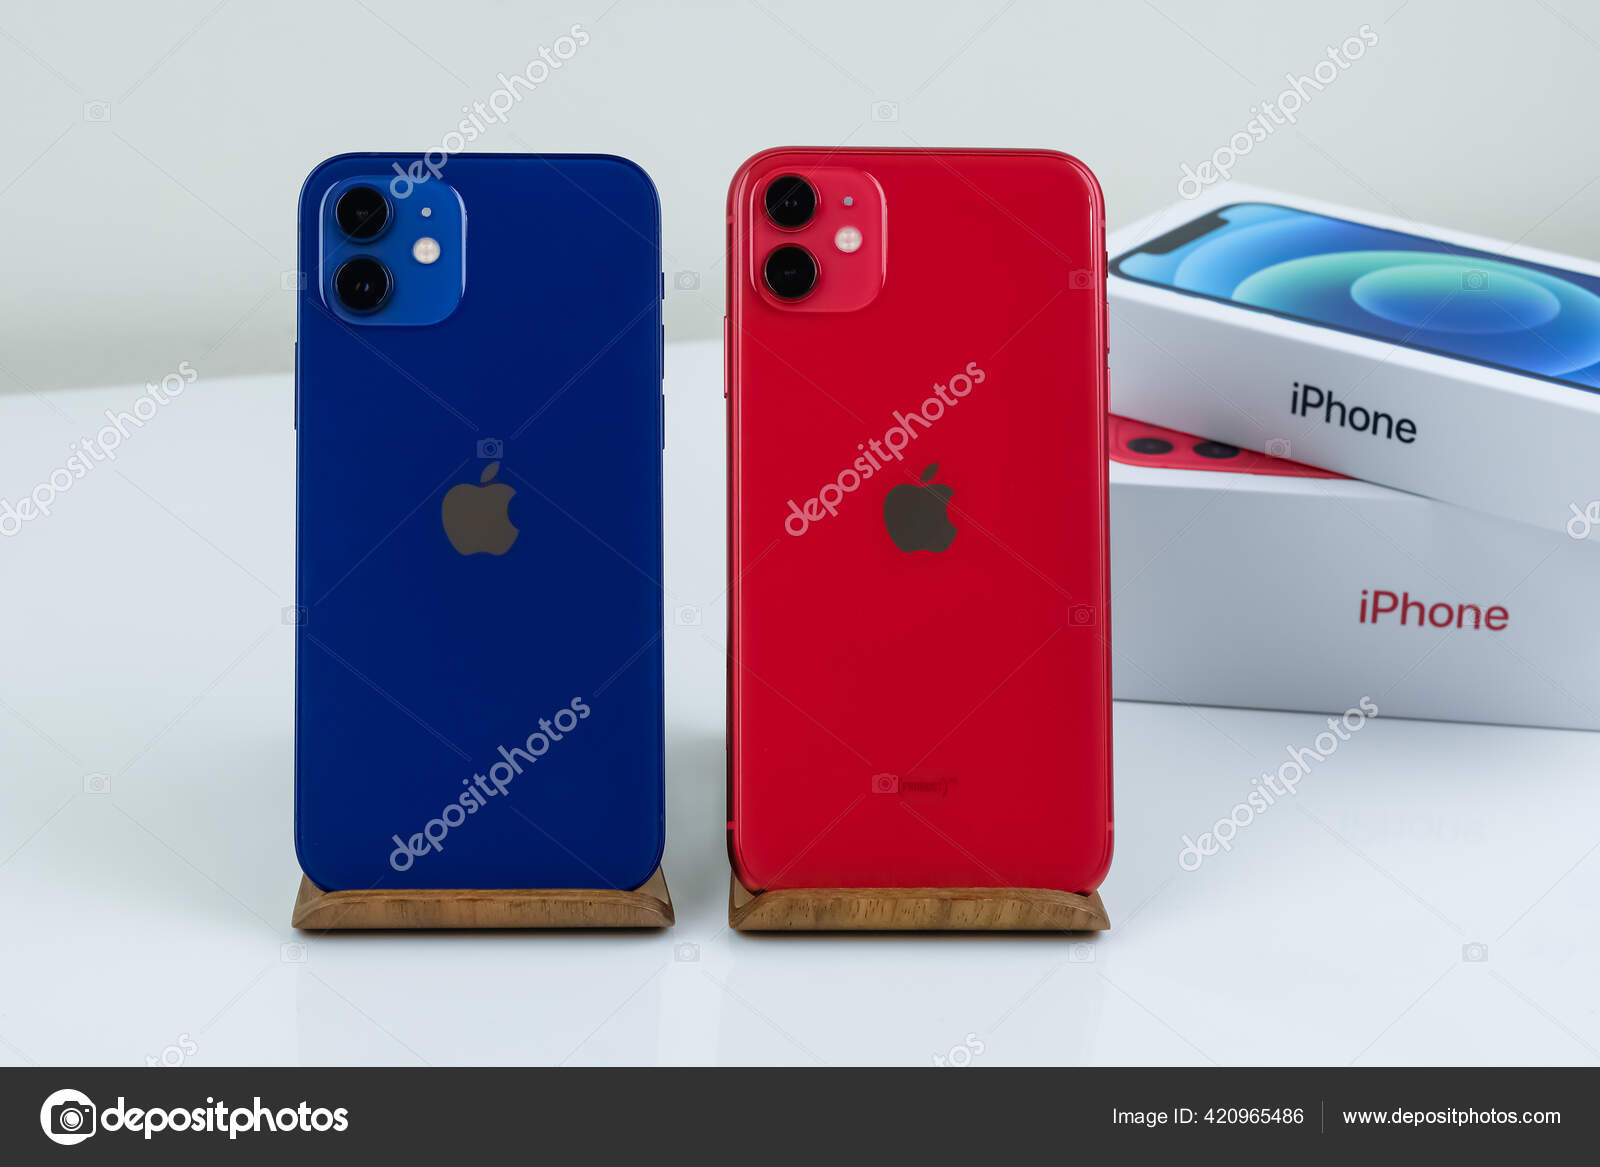 Iphone Blue Iphone Red Side Side Next Boxes Stock Editorial Photo C Nycruss